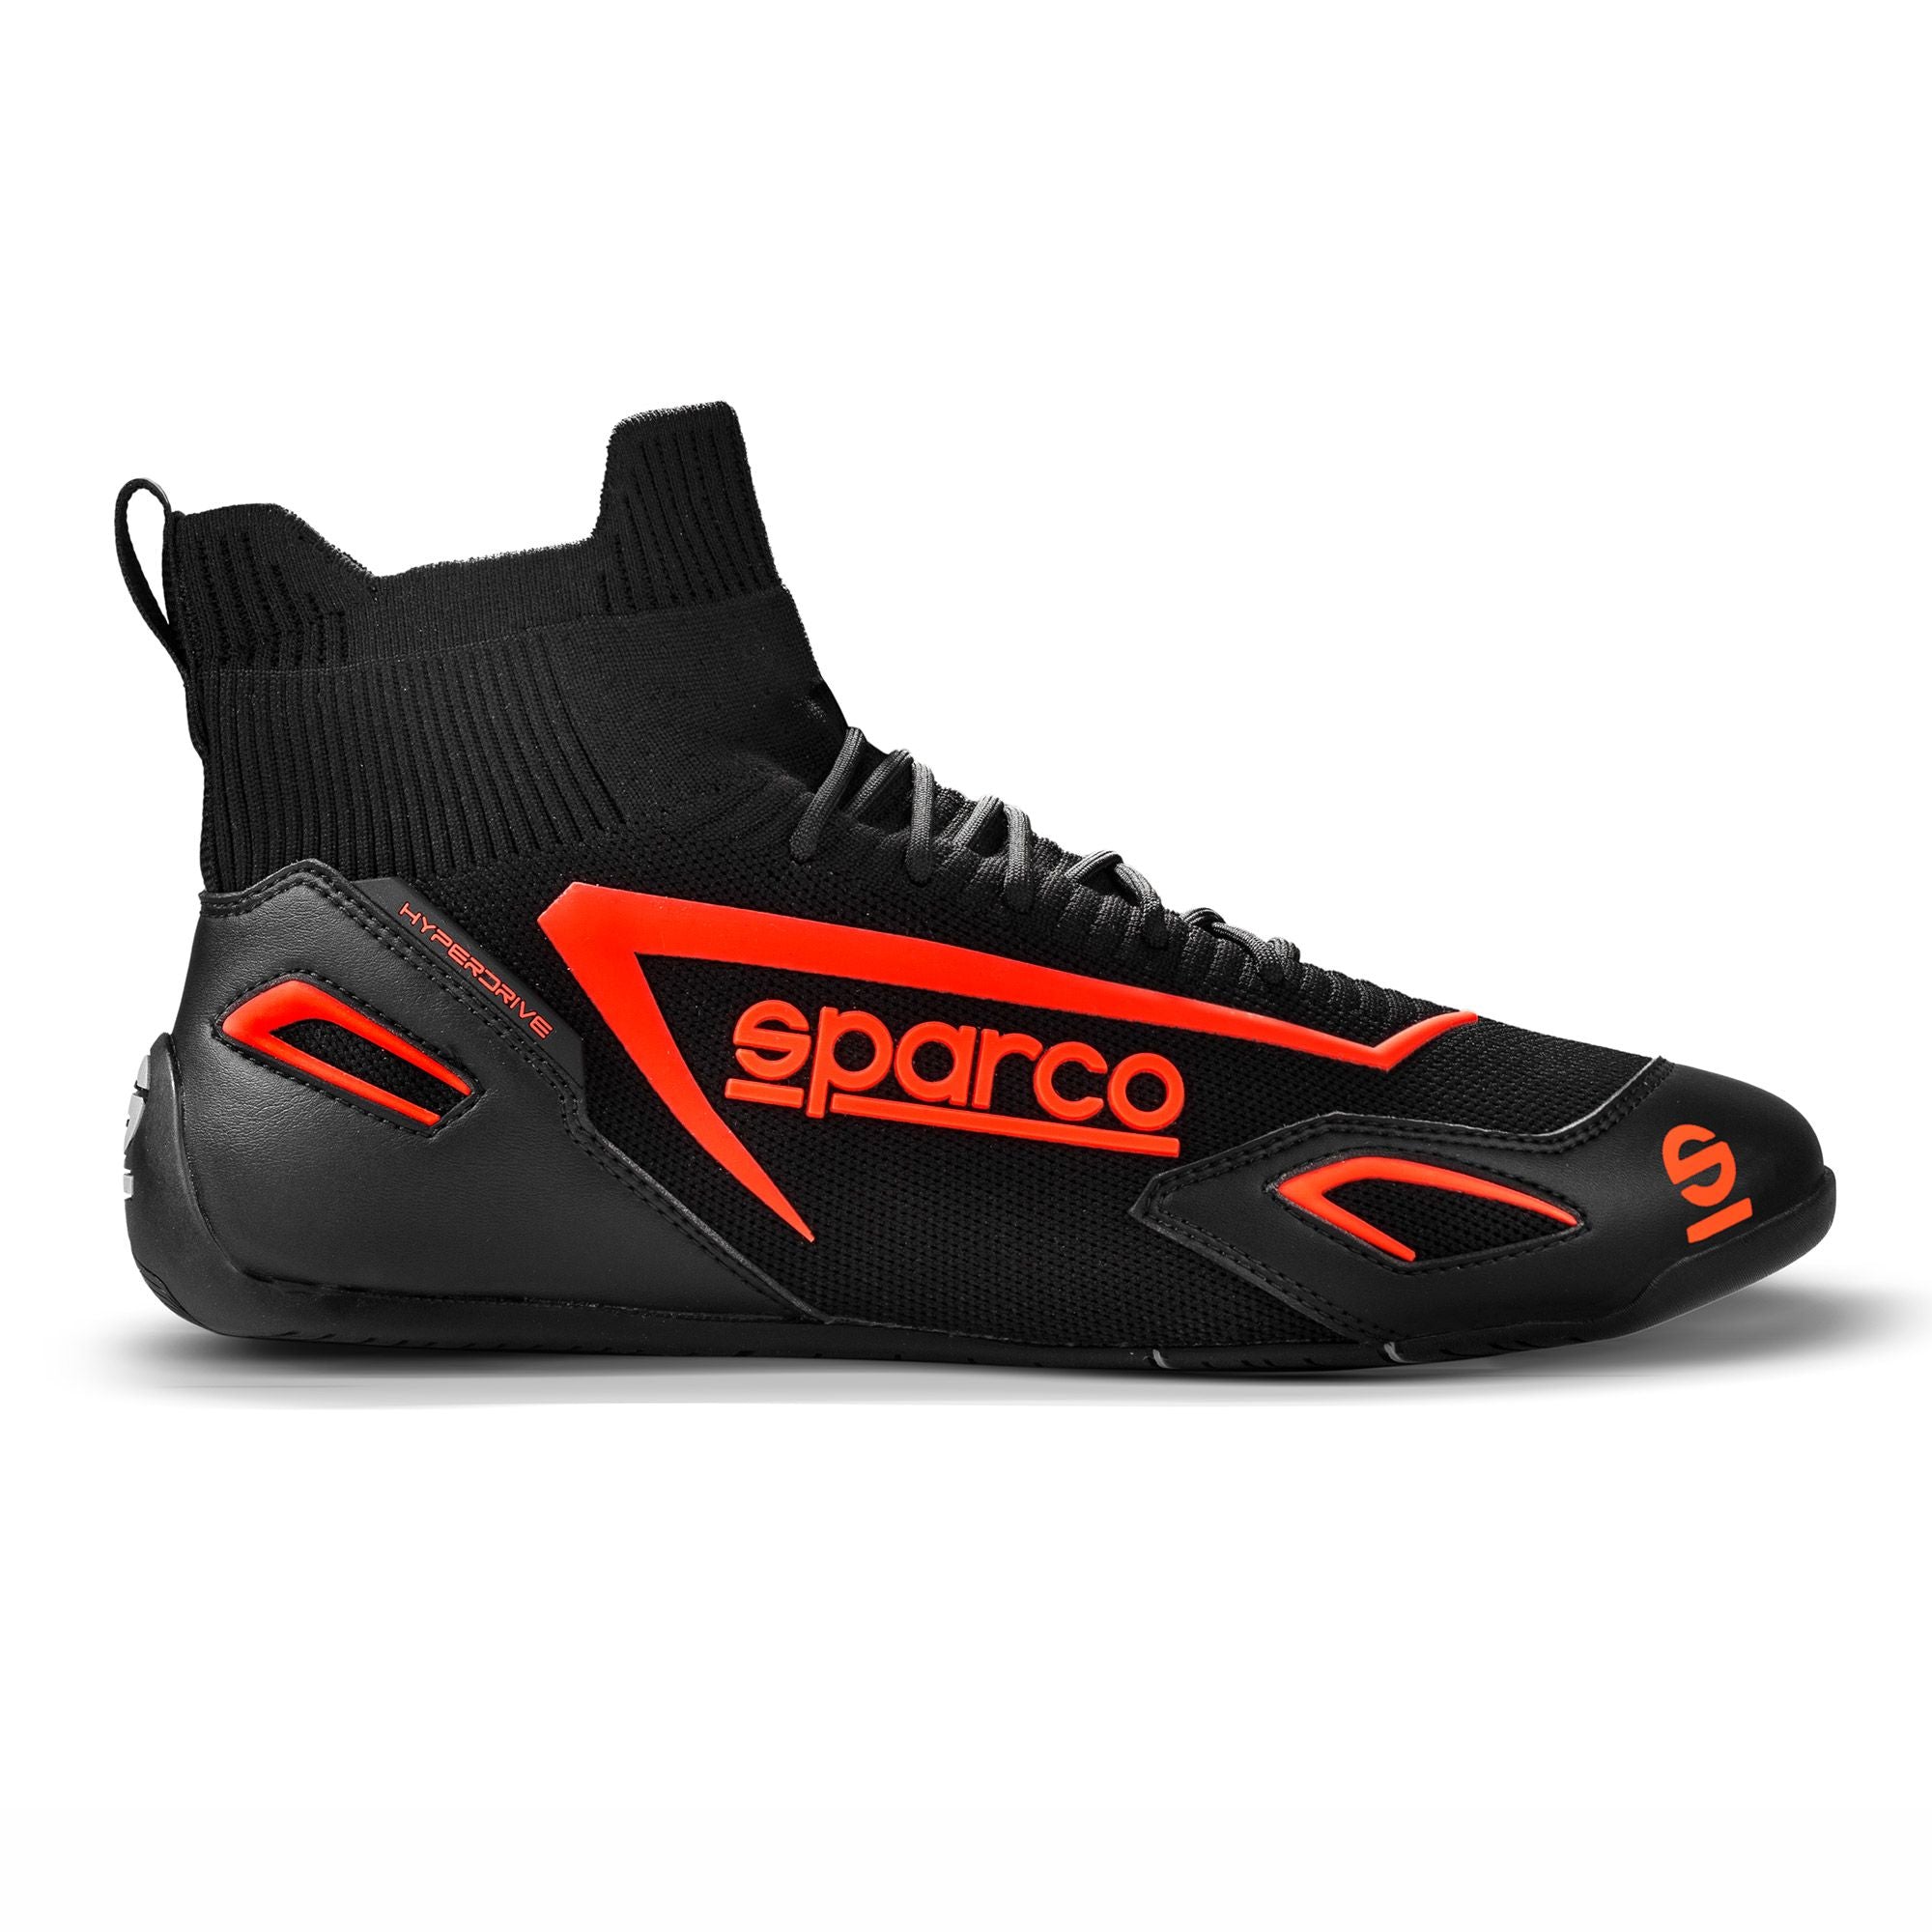 SPARCO 00129344NRRS Gaming sim racing shoes HYPERDRIVE, black/red, size 44 Photo-2 